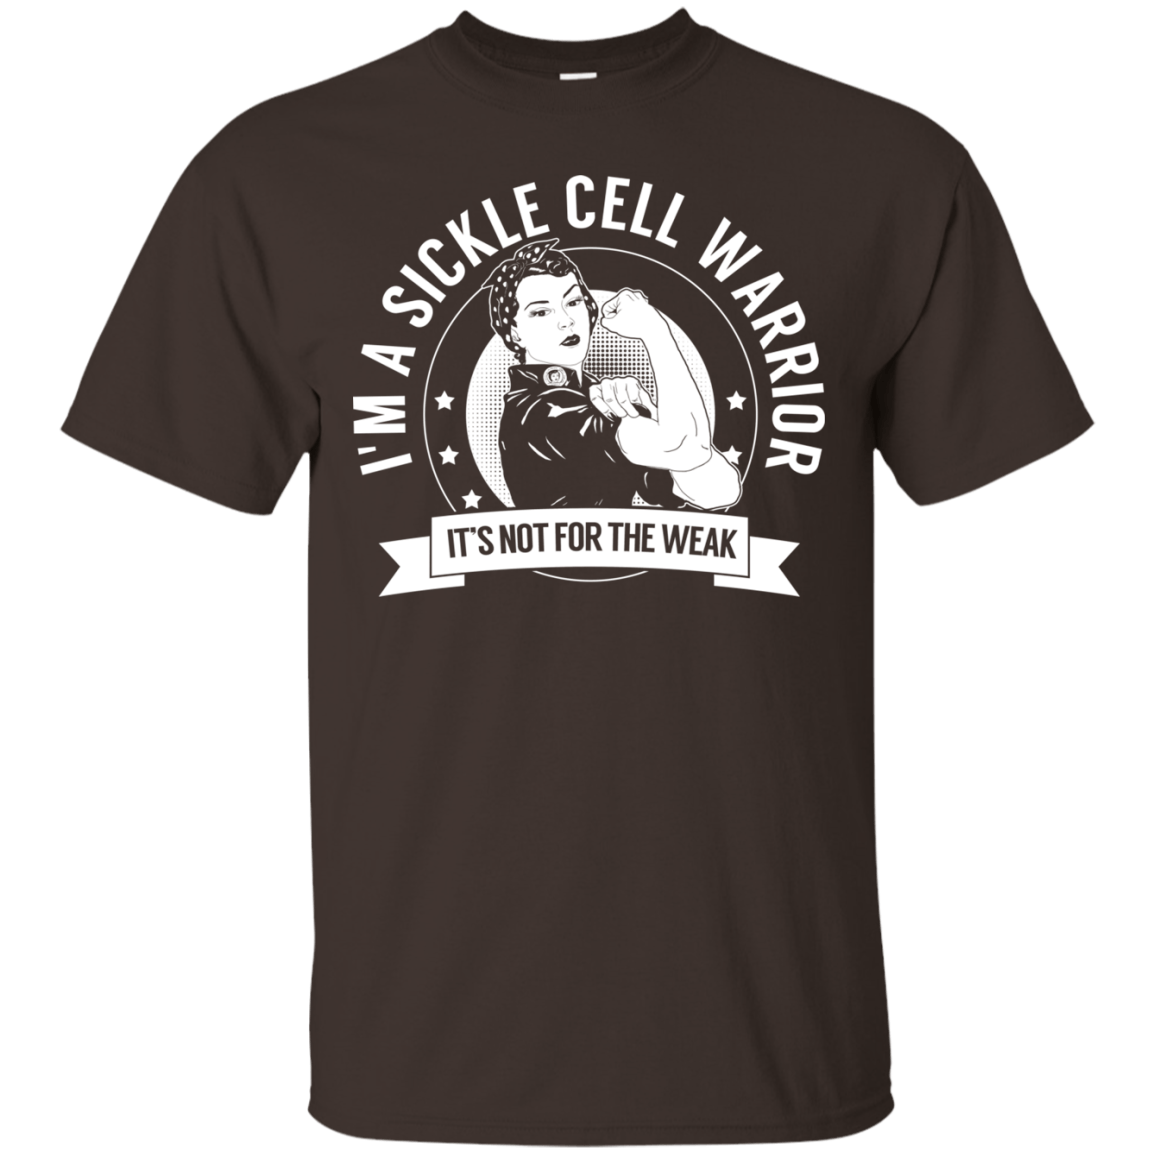 Sickle Cell Anemia - Sickle Cell Warrior NFTW Unisex Shirt - The Unchargeables